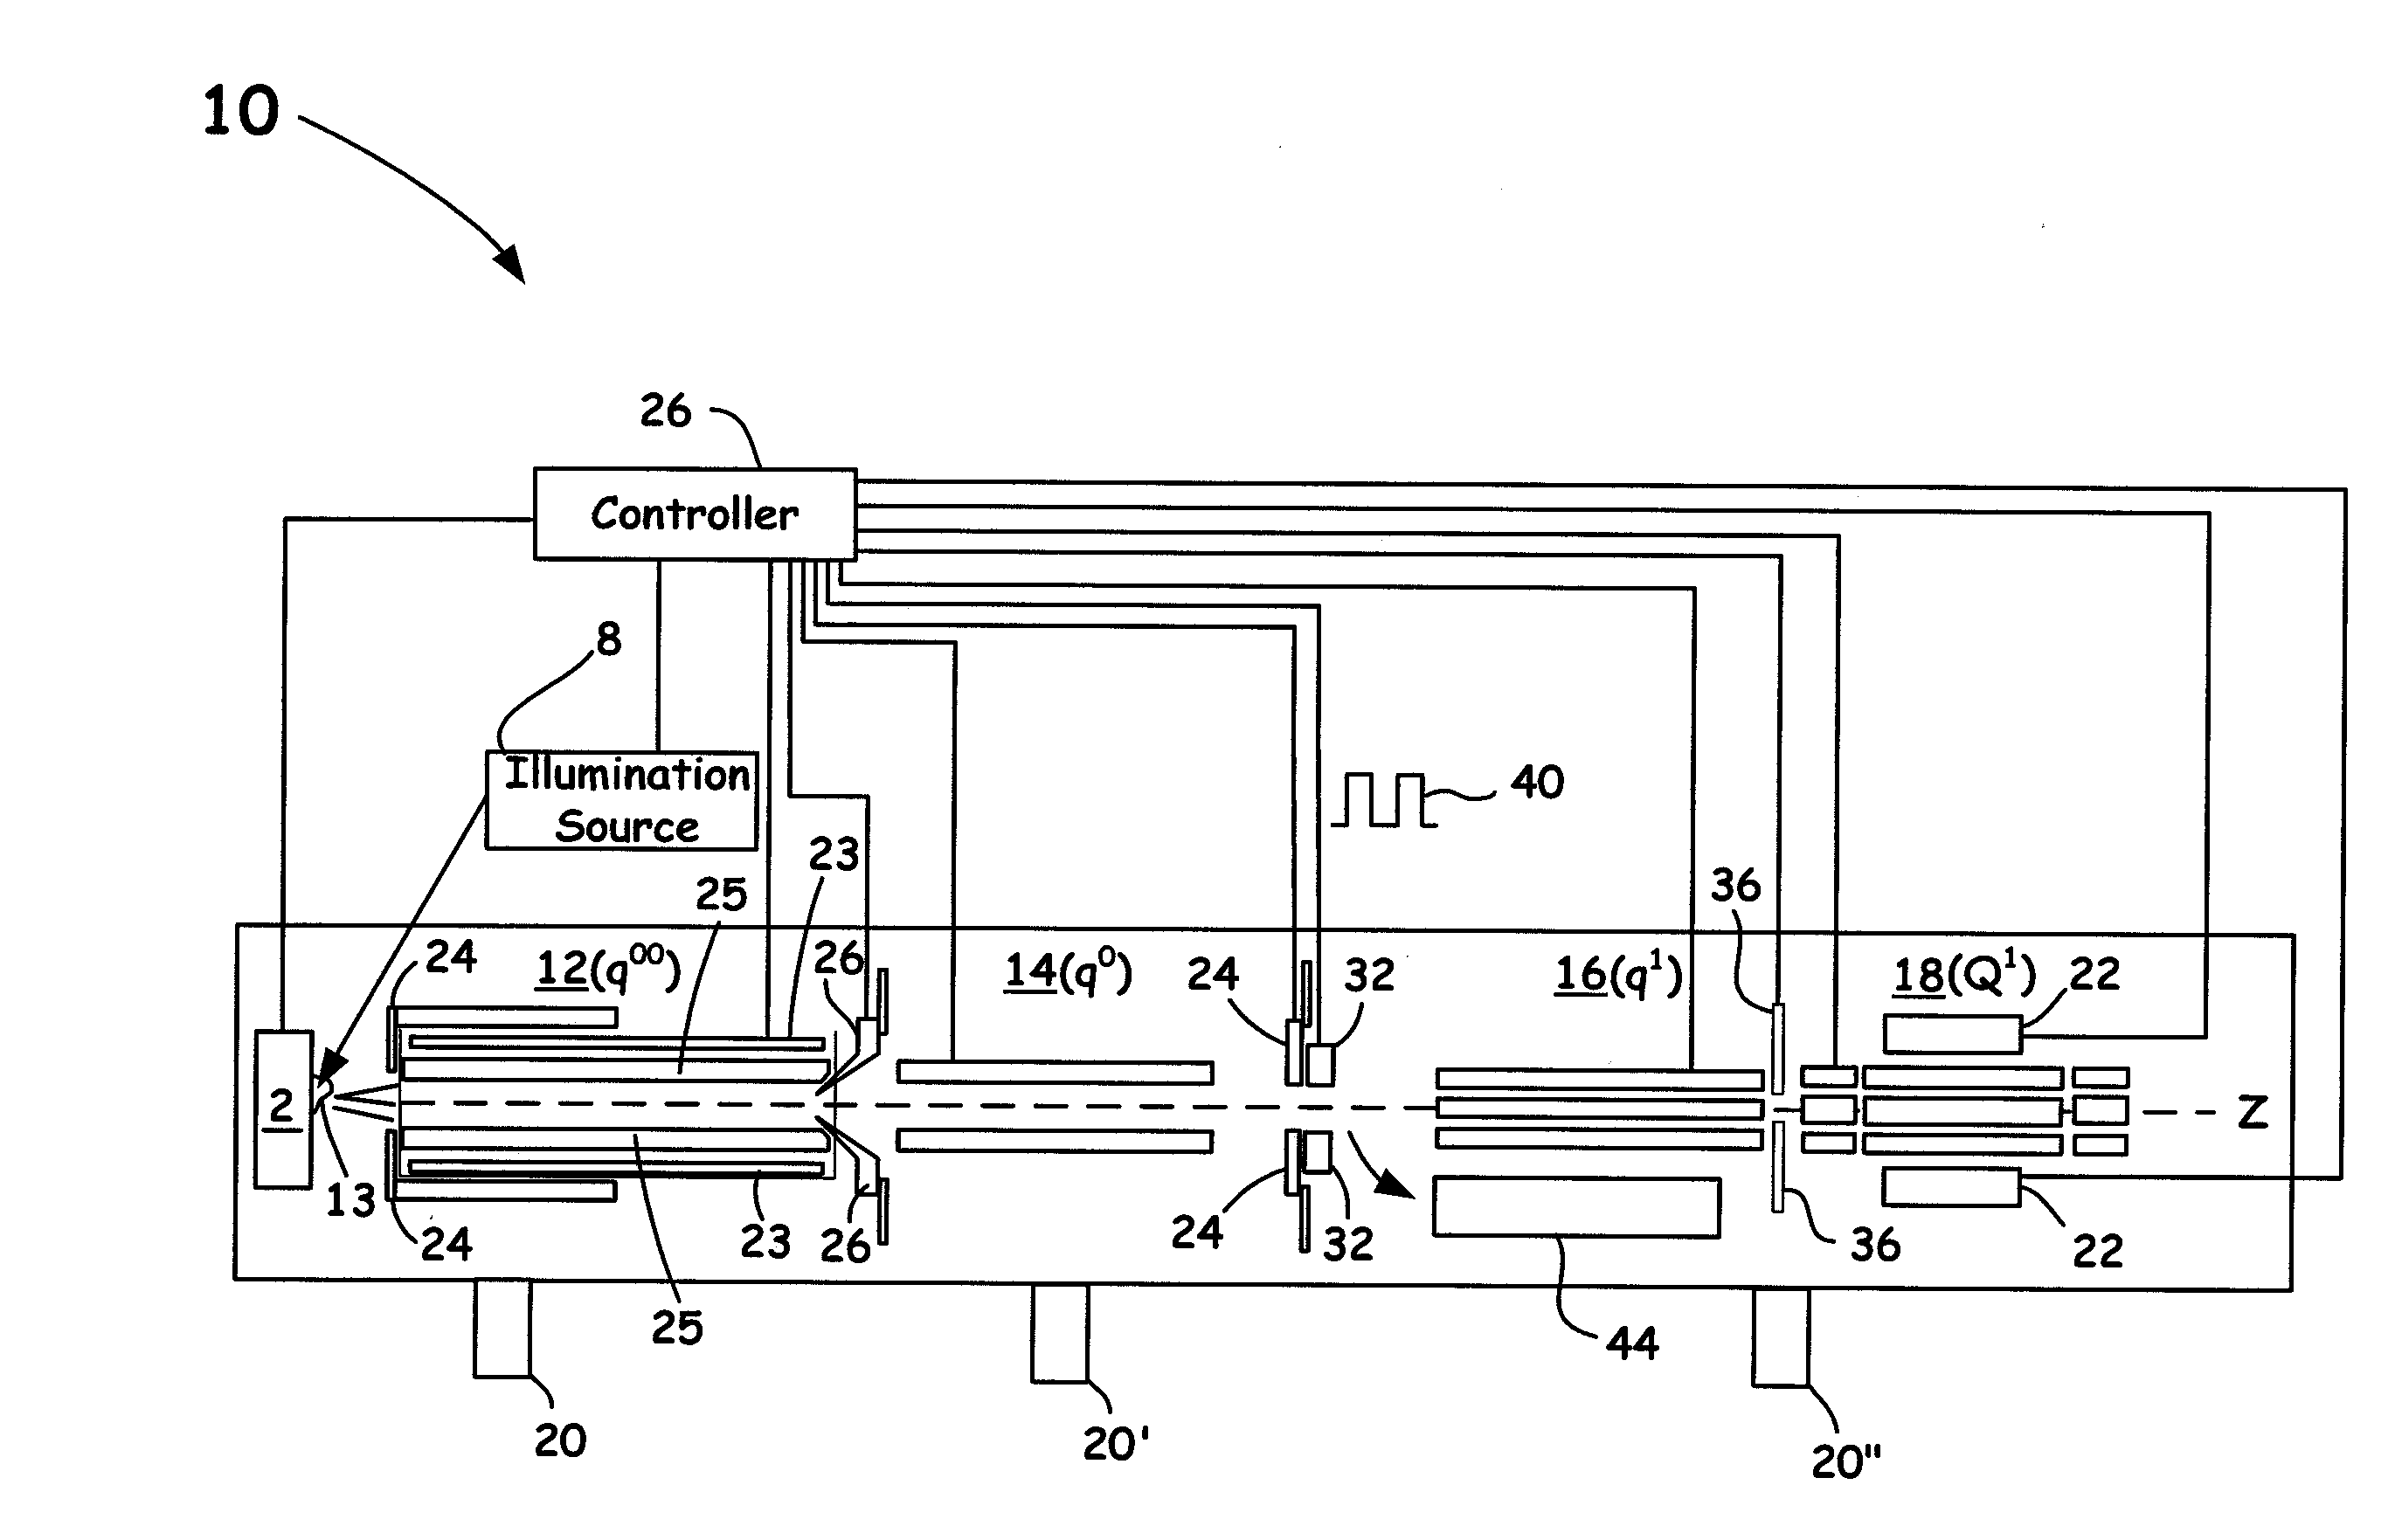 Automatic gain control (AGC) method for an ion trap and a temporally non-uniform ion beam